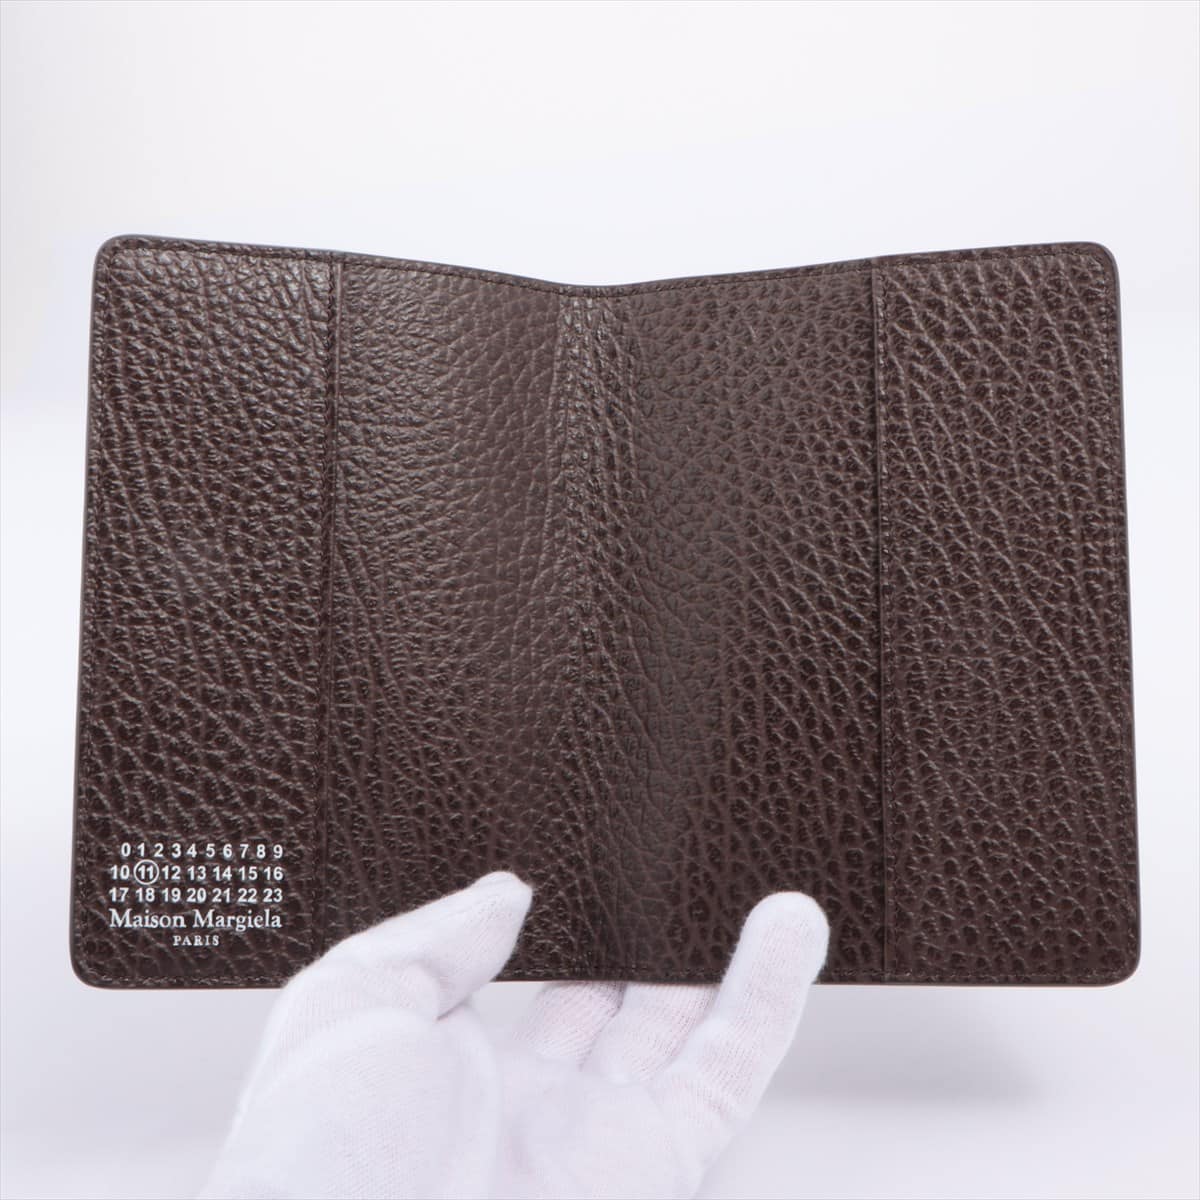 Maison Margiela 4 stitches Leather Notebook cover Brown